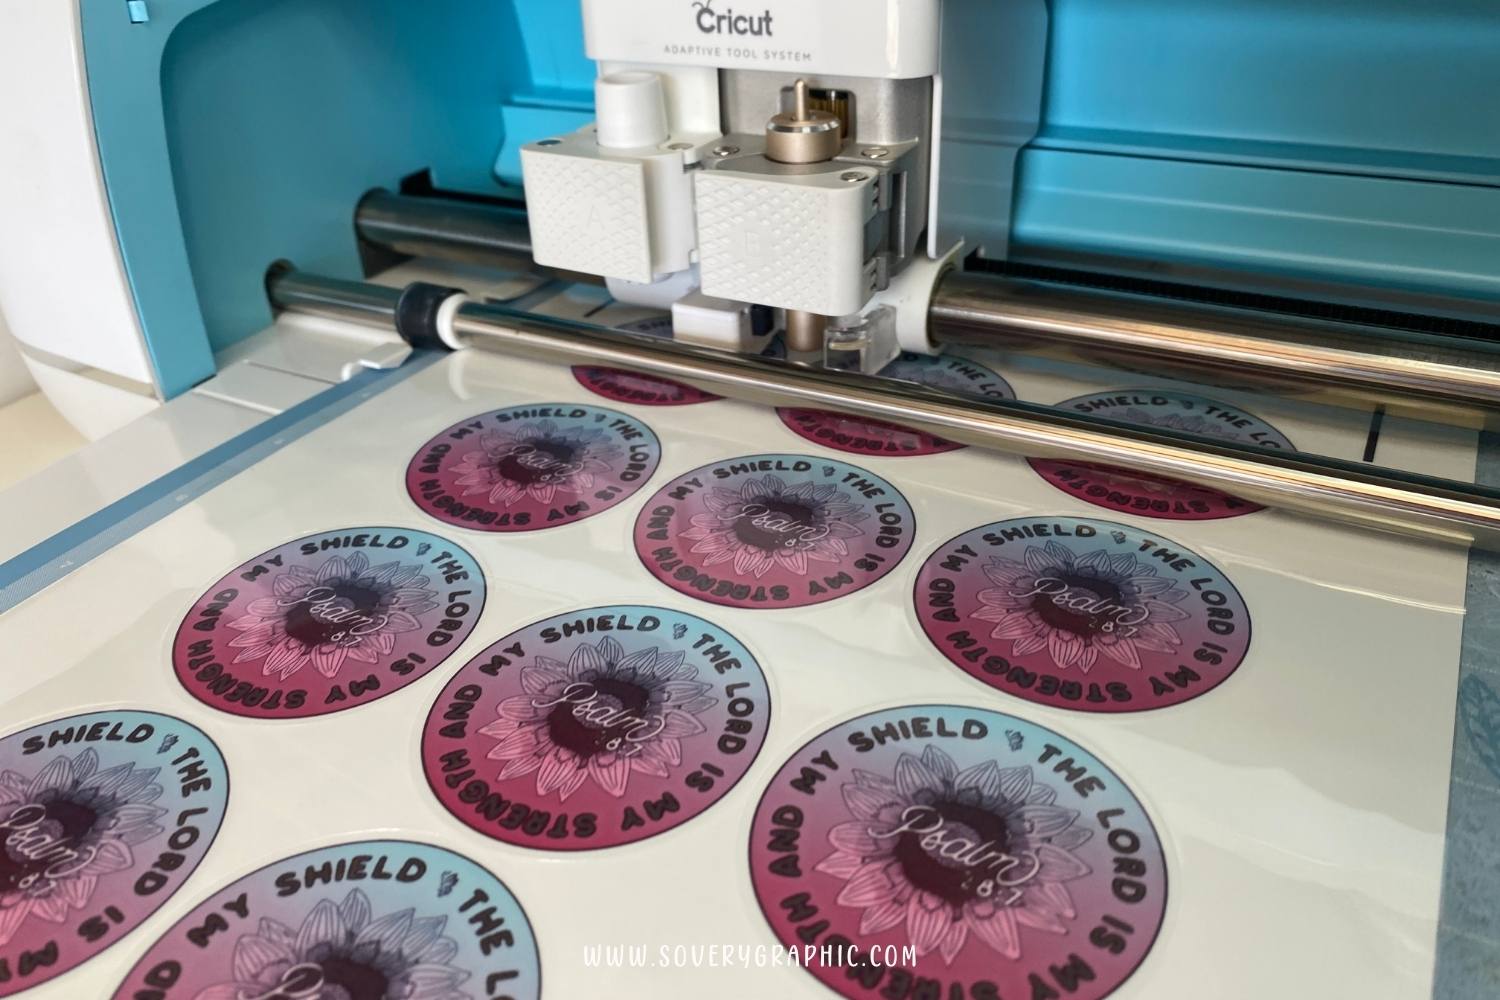 Load the sticker sheet into the Cricut Maker and Press Go to cut